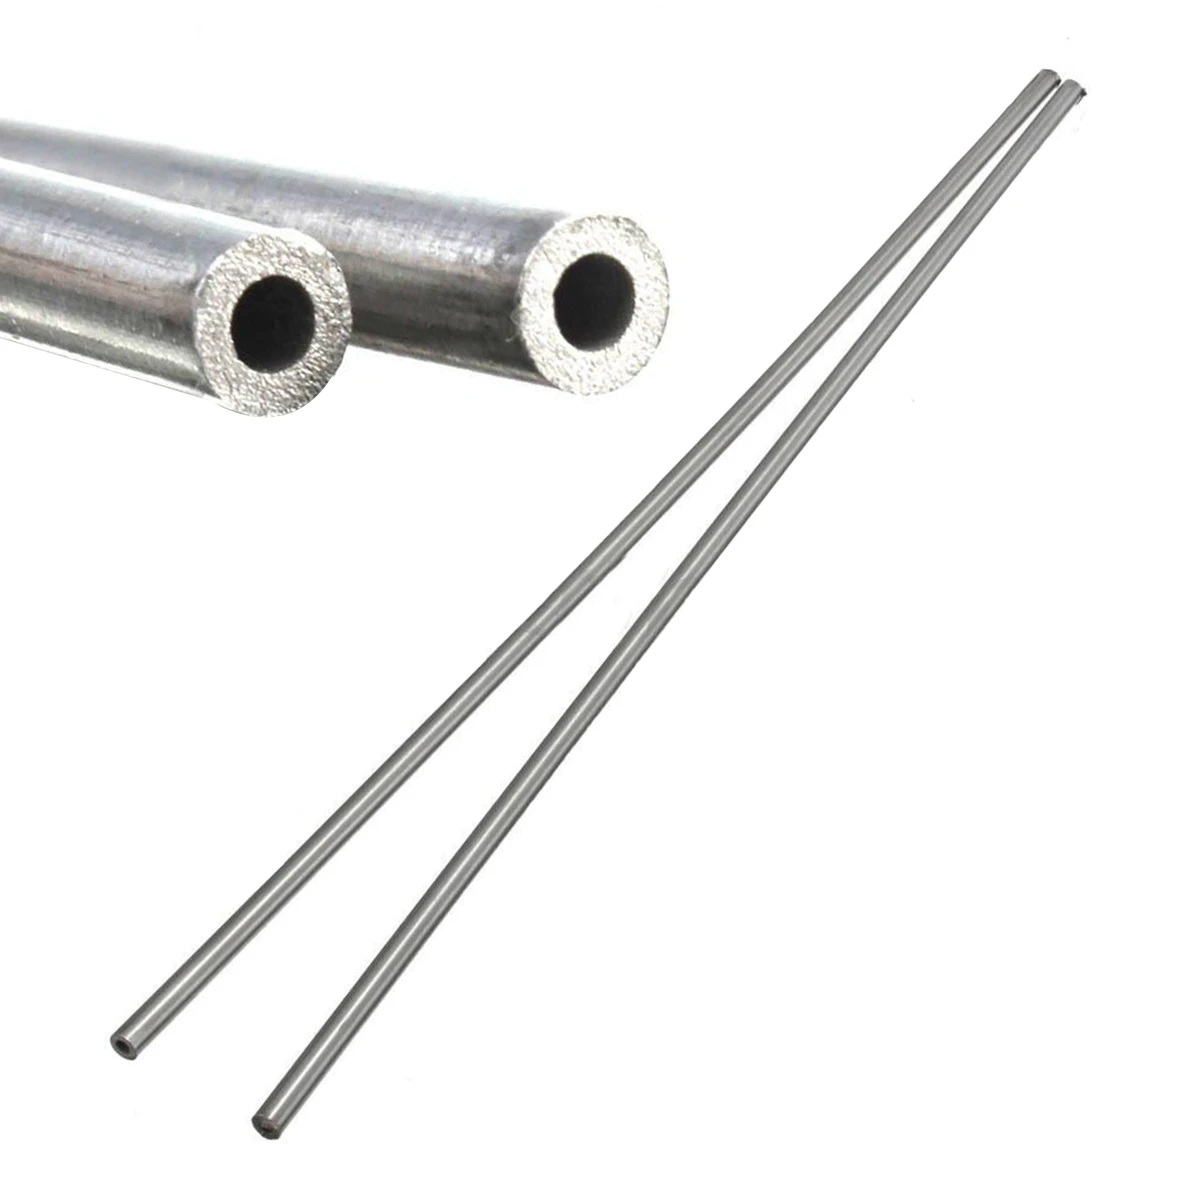 304 Stainless Steel Capillary Tube OD 4mm x 3mm ID Length 250mm Metal ToolOD